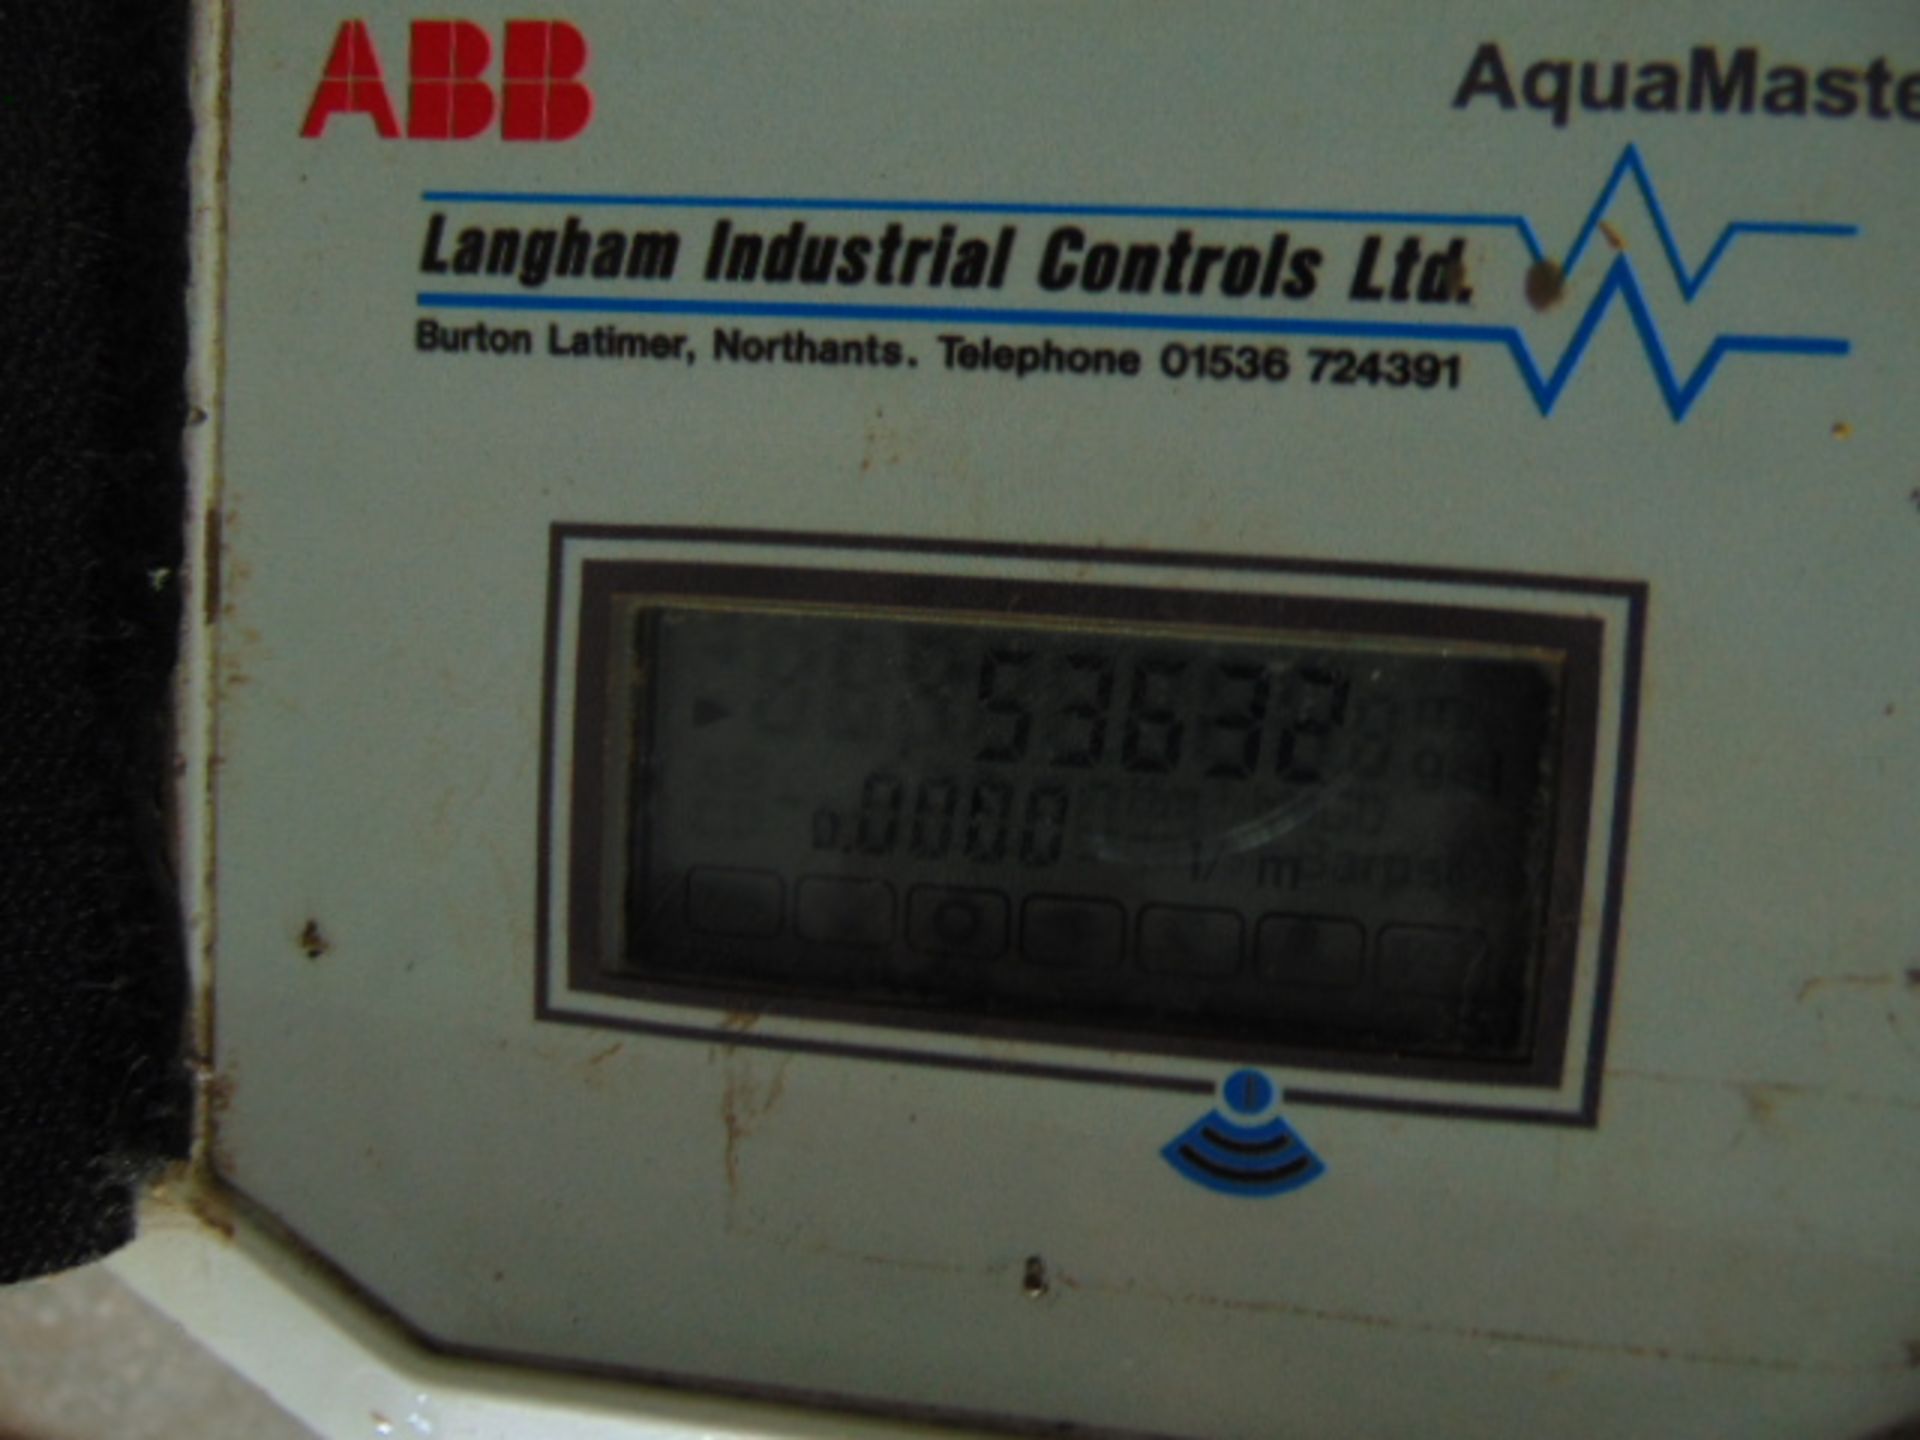 Vertical Hydrant Flow Meter with ABB Aquamaster - Image 4 of 4